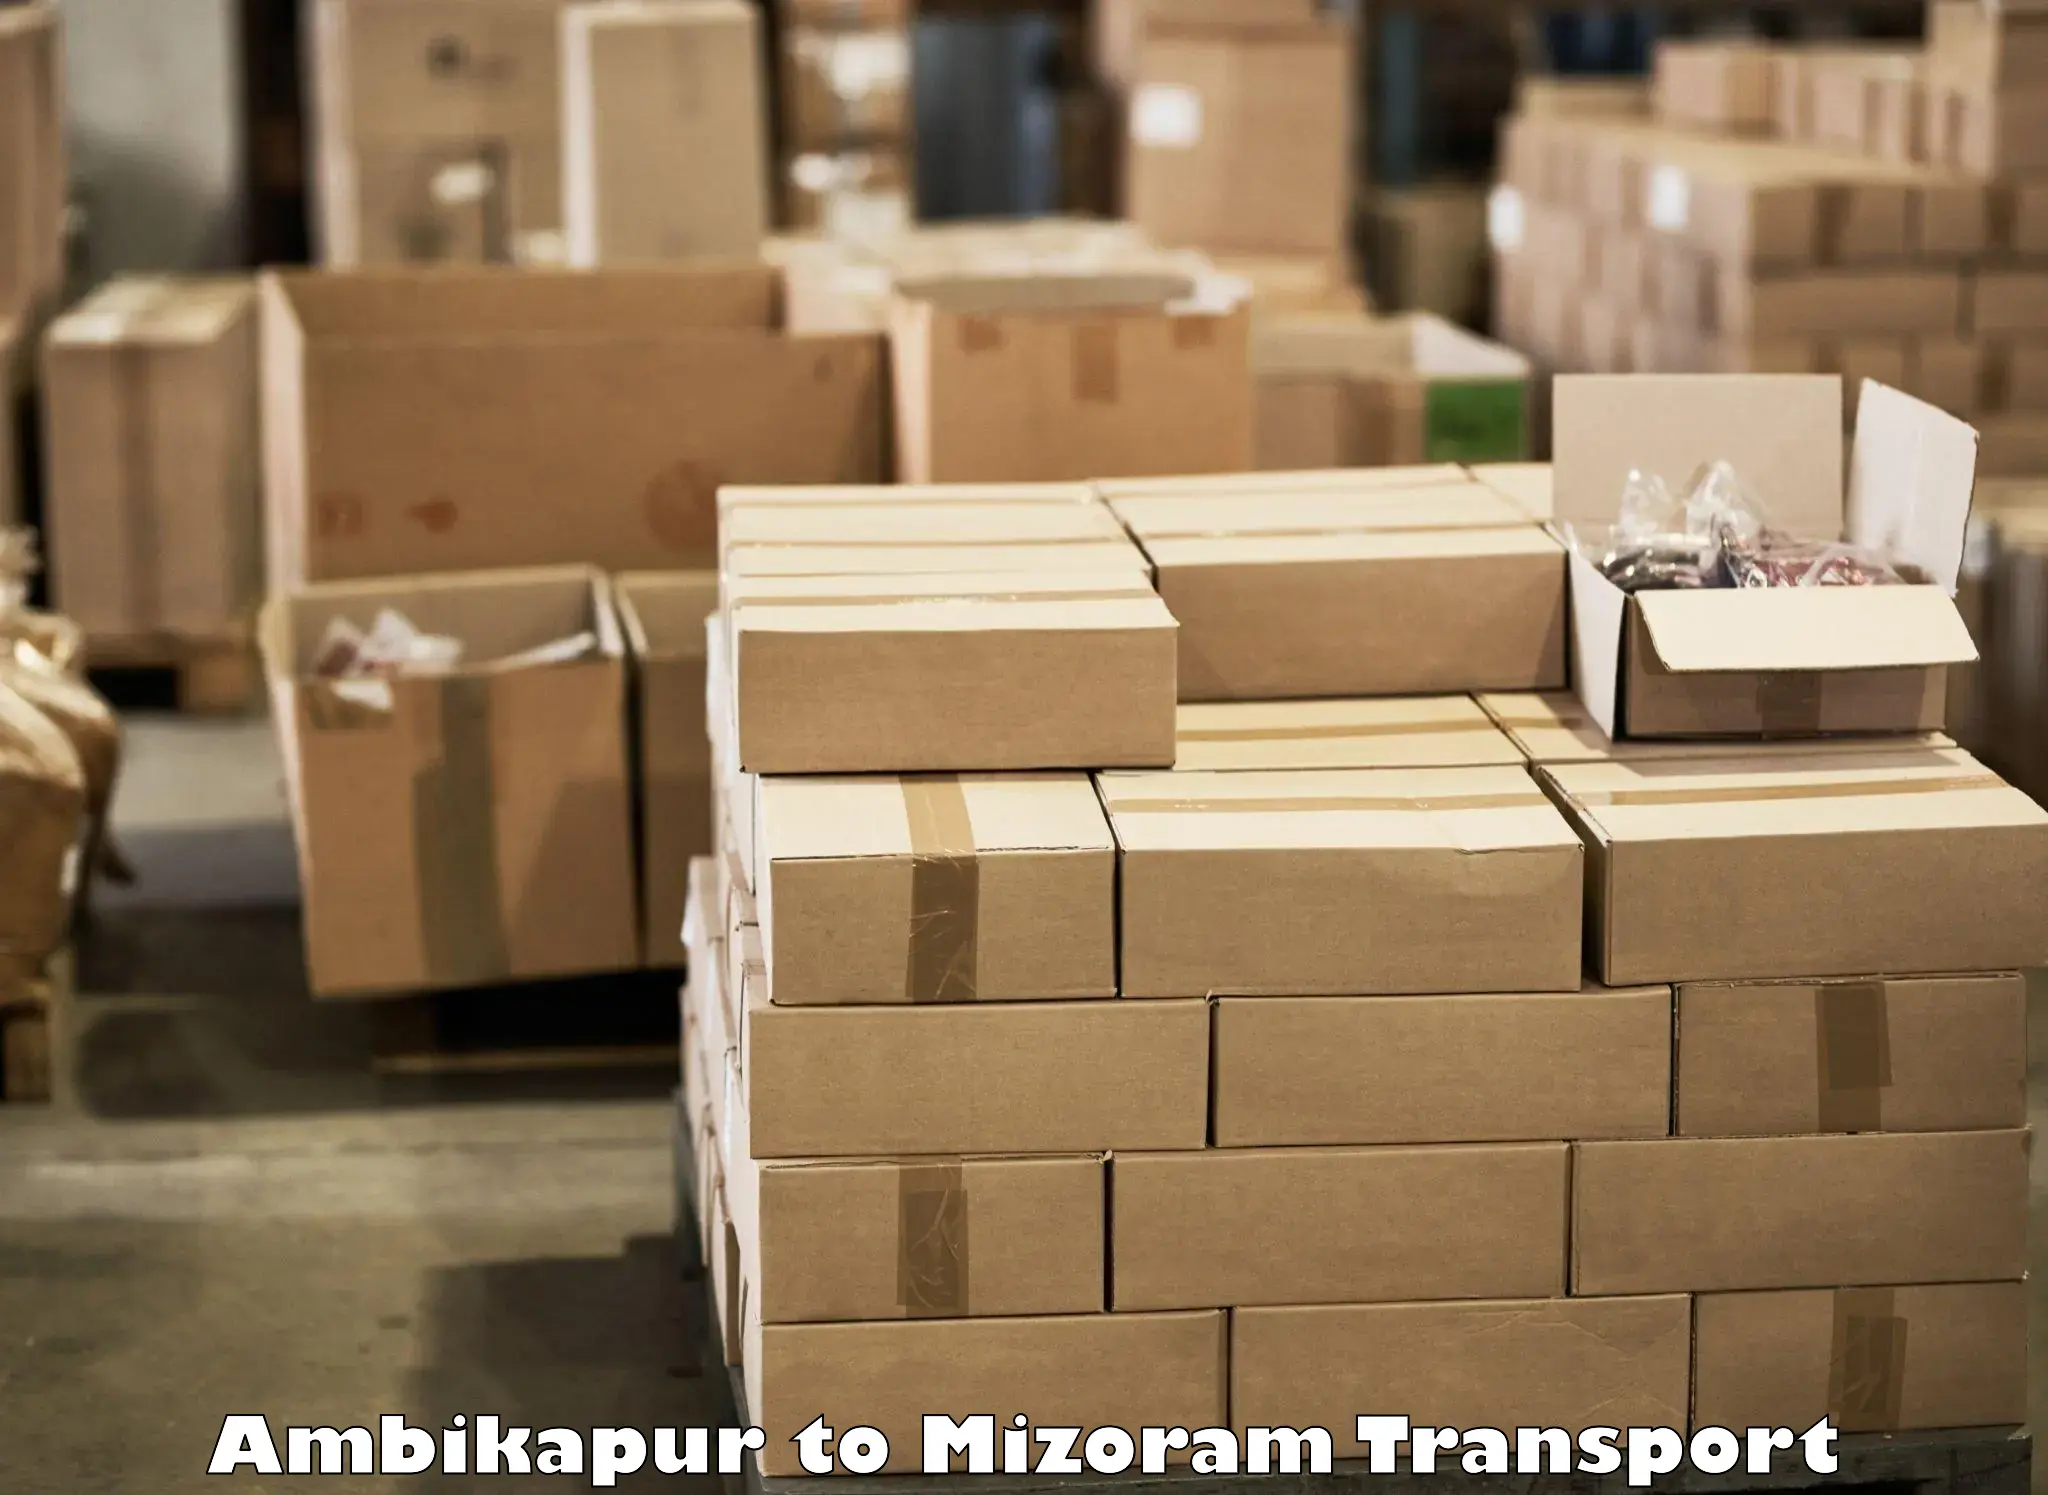 Daily parcel service transport Ambikapur to Aizawl